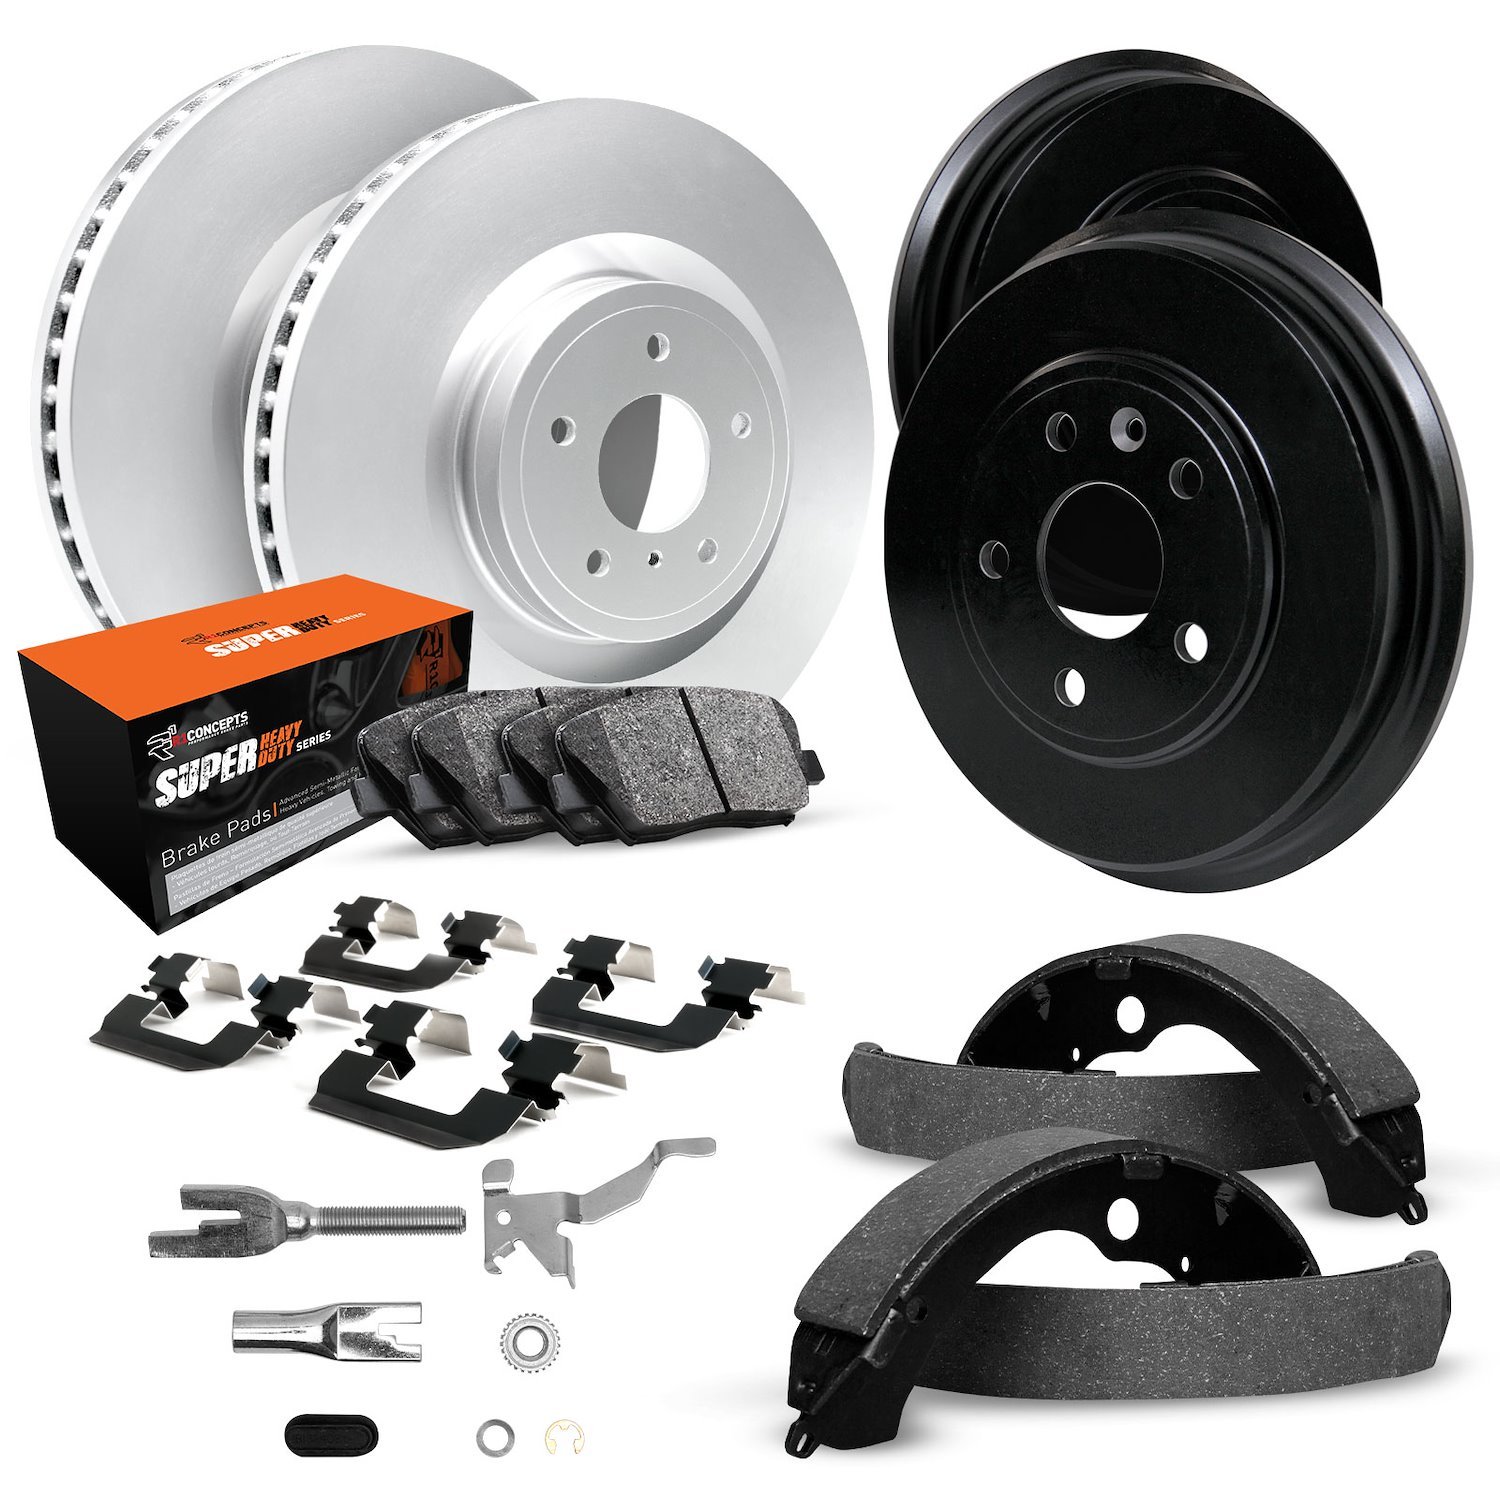 GEO-Carbon Brake Rotor & Drum Set w/Super-Duty Pads, Shoes, Hardware/Adjusters, 2004-2008 GM, Position: Front & Rear